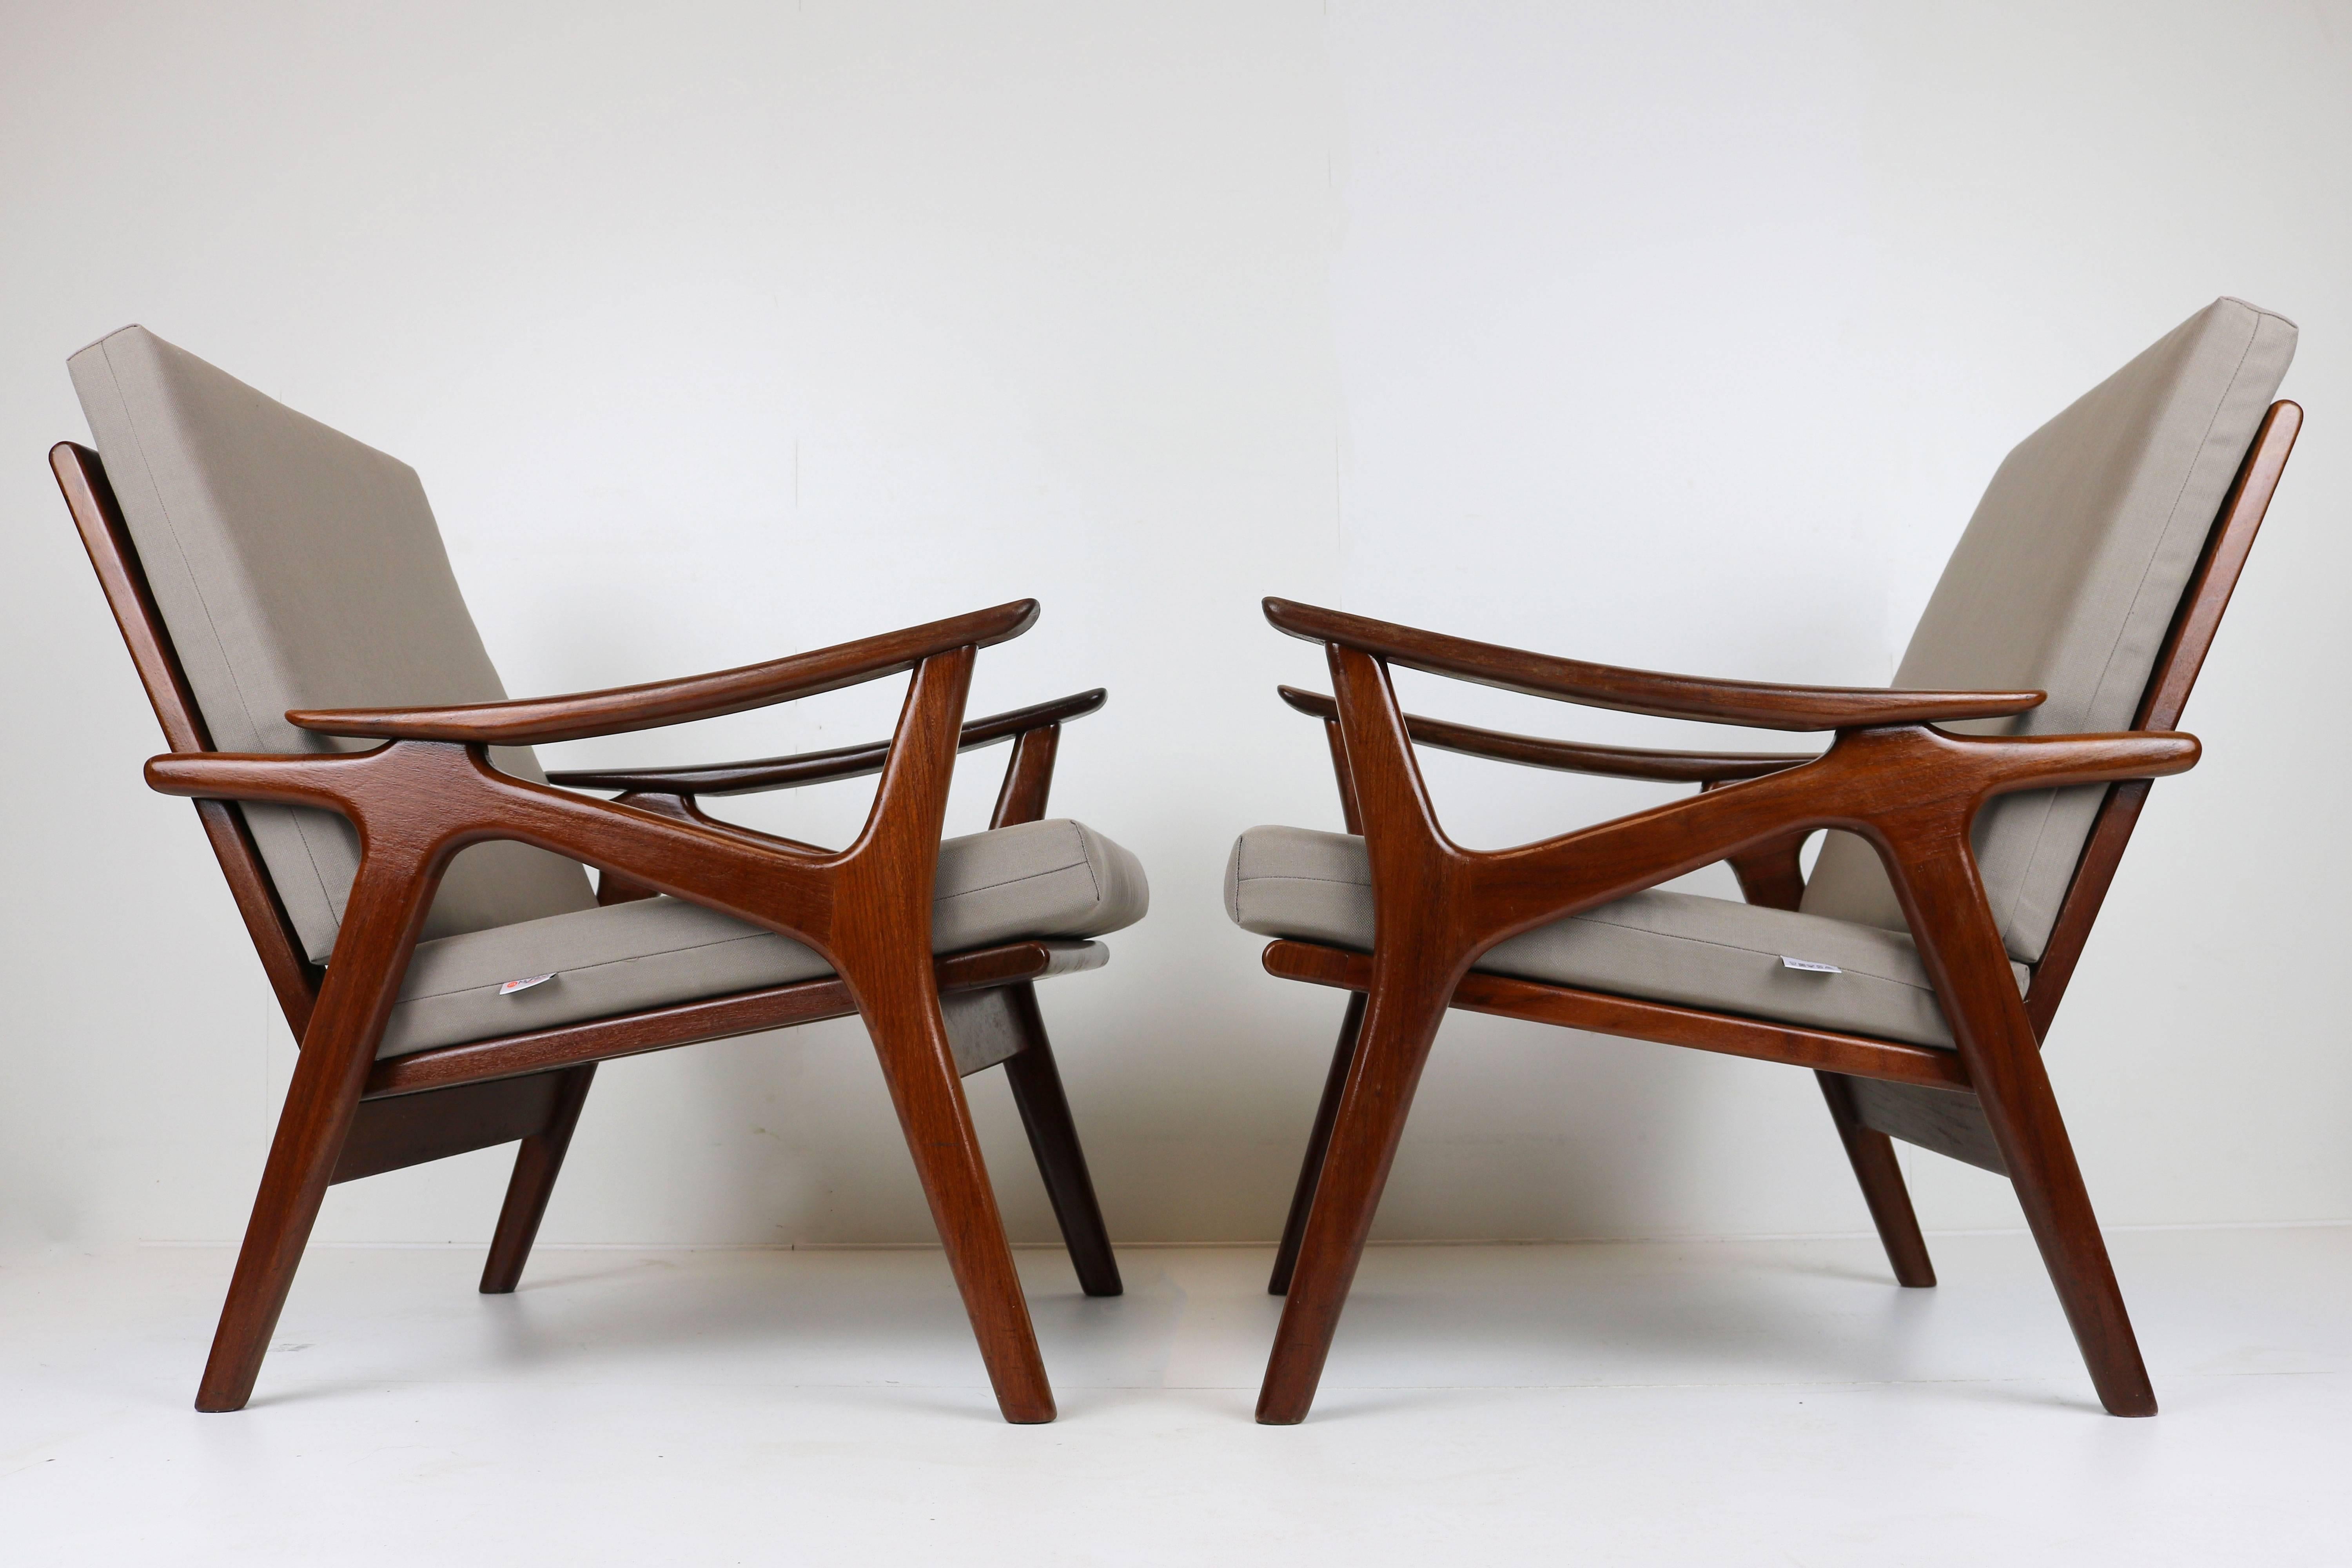 Magnificent pair Vintage lounge chairs designed by Dutch furniture makers De Ster Gelderland in the 1960s
Stunning organic lines in solid teak, fully new upholstery in a light gray colour.
Will only be sold as a set.